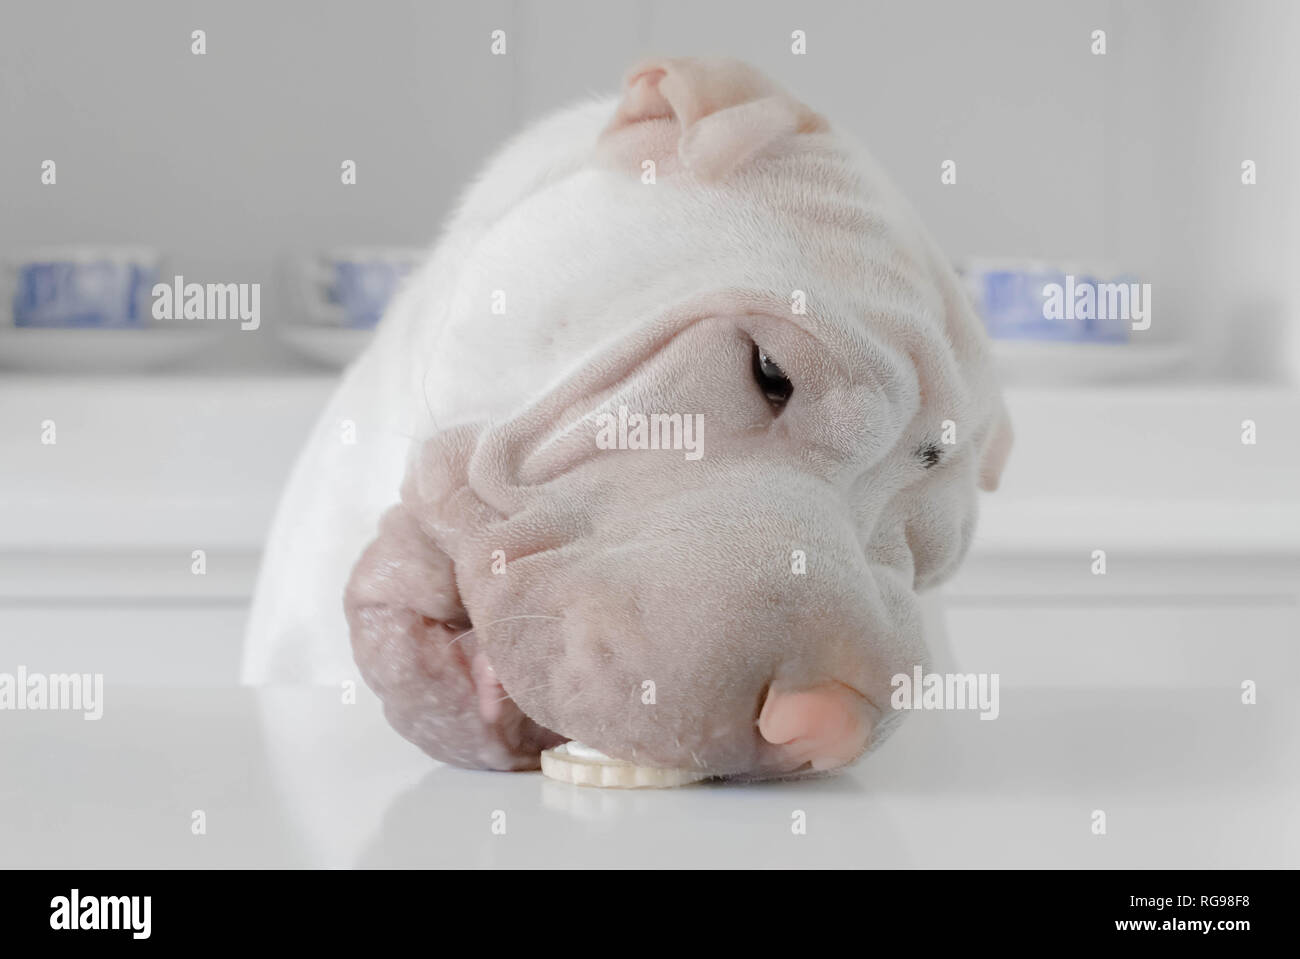 Shar pei puppy dog eating a cookie off a kitchen worktop Stock Photo